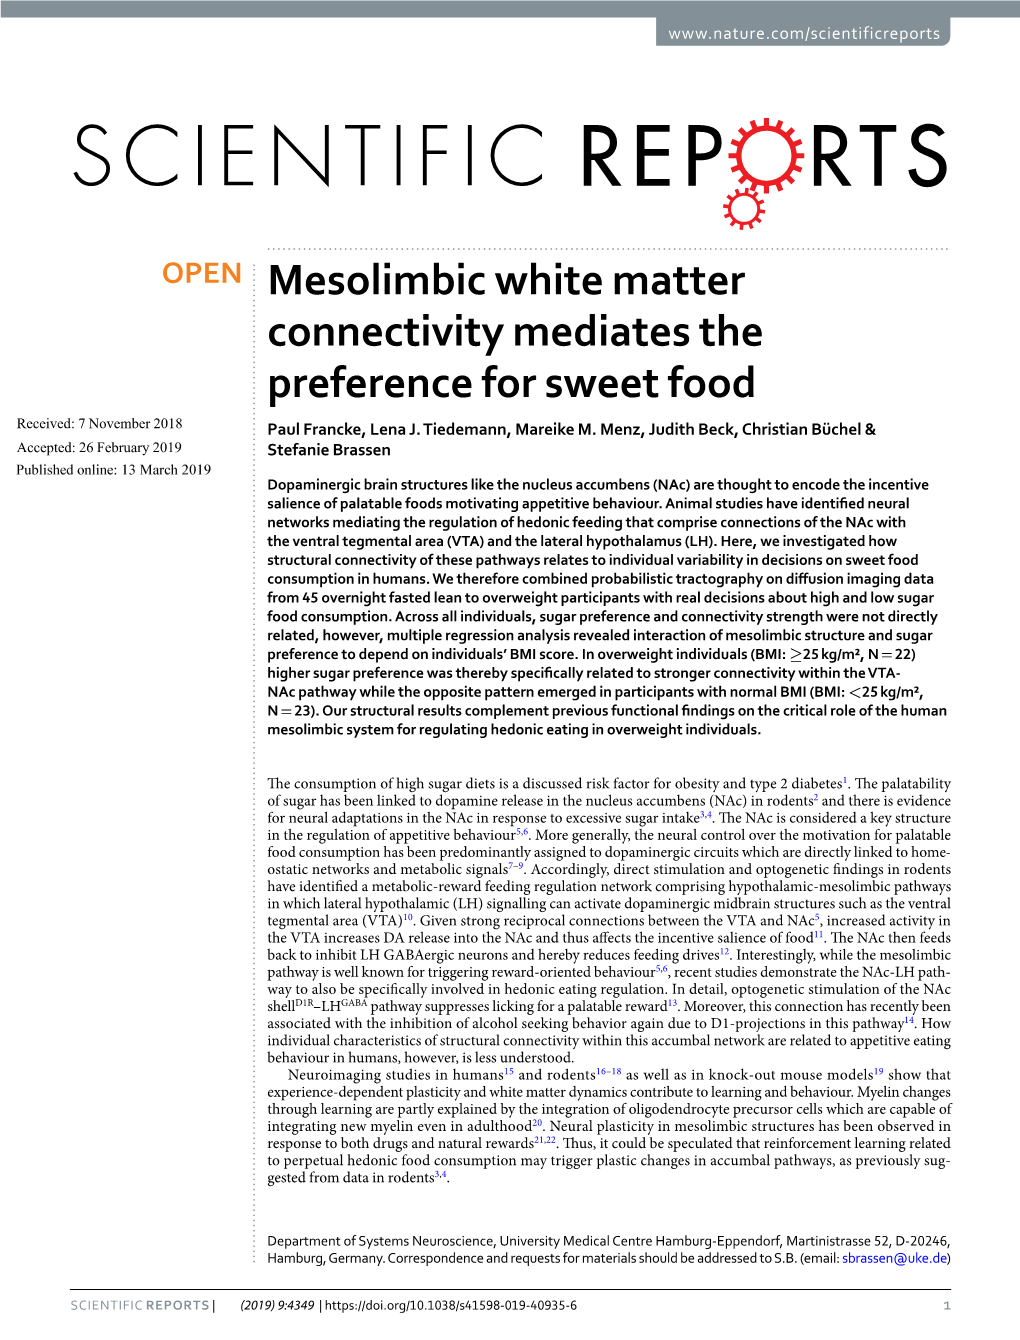 Mesolimbic White Matter Connectivity Mediates the Preference for Sweet Food Received: 7 November 2018 Paul Francke, Lena J